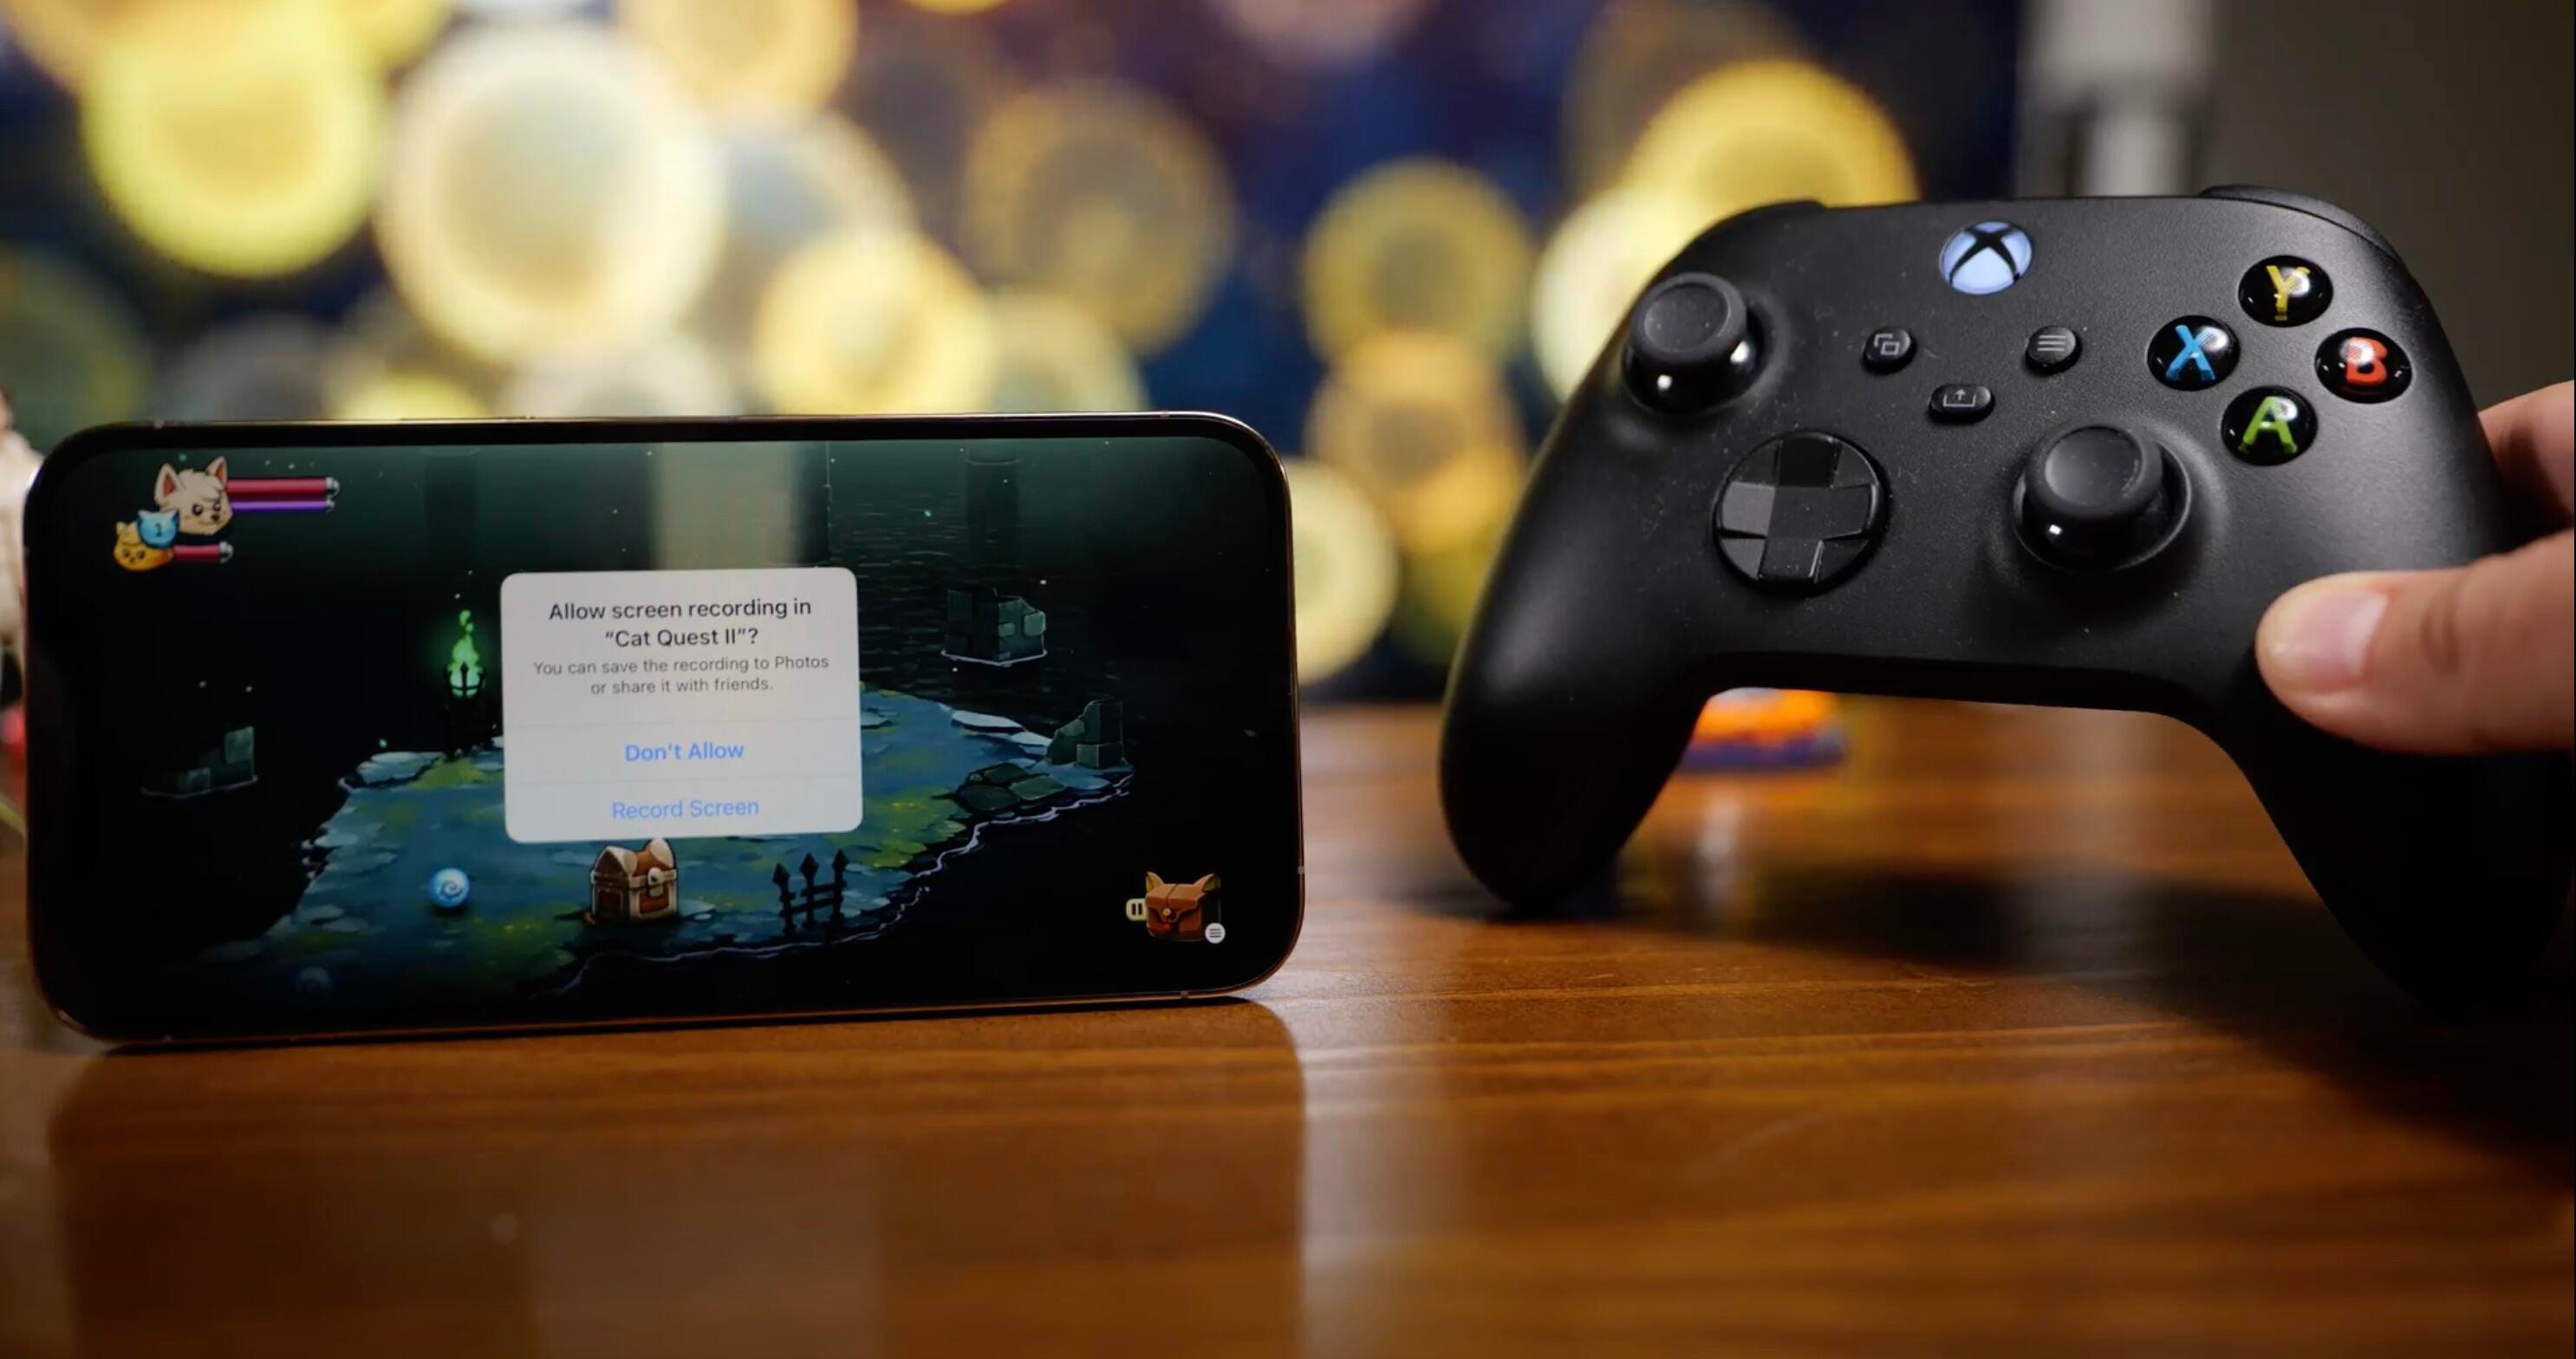 Gamers can screen-record with an Xbox or PS controller in iOS 15. Here’s how